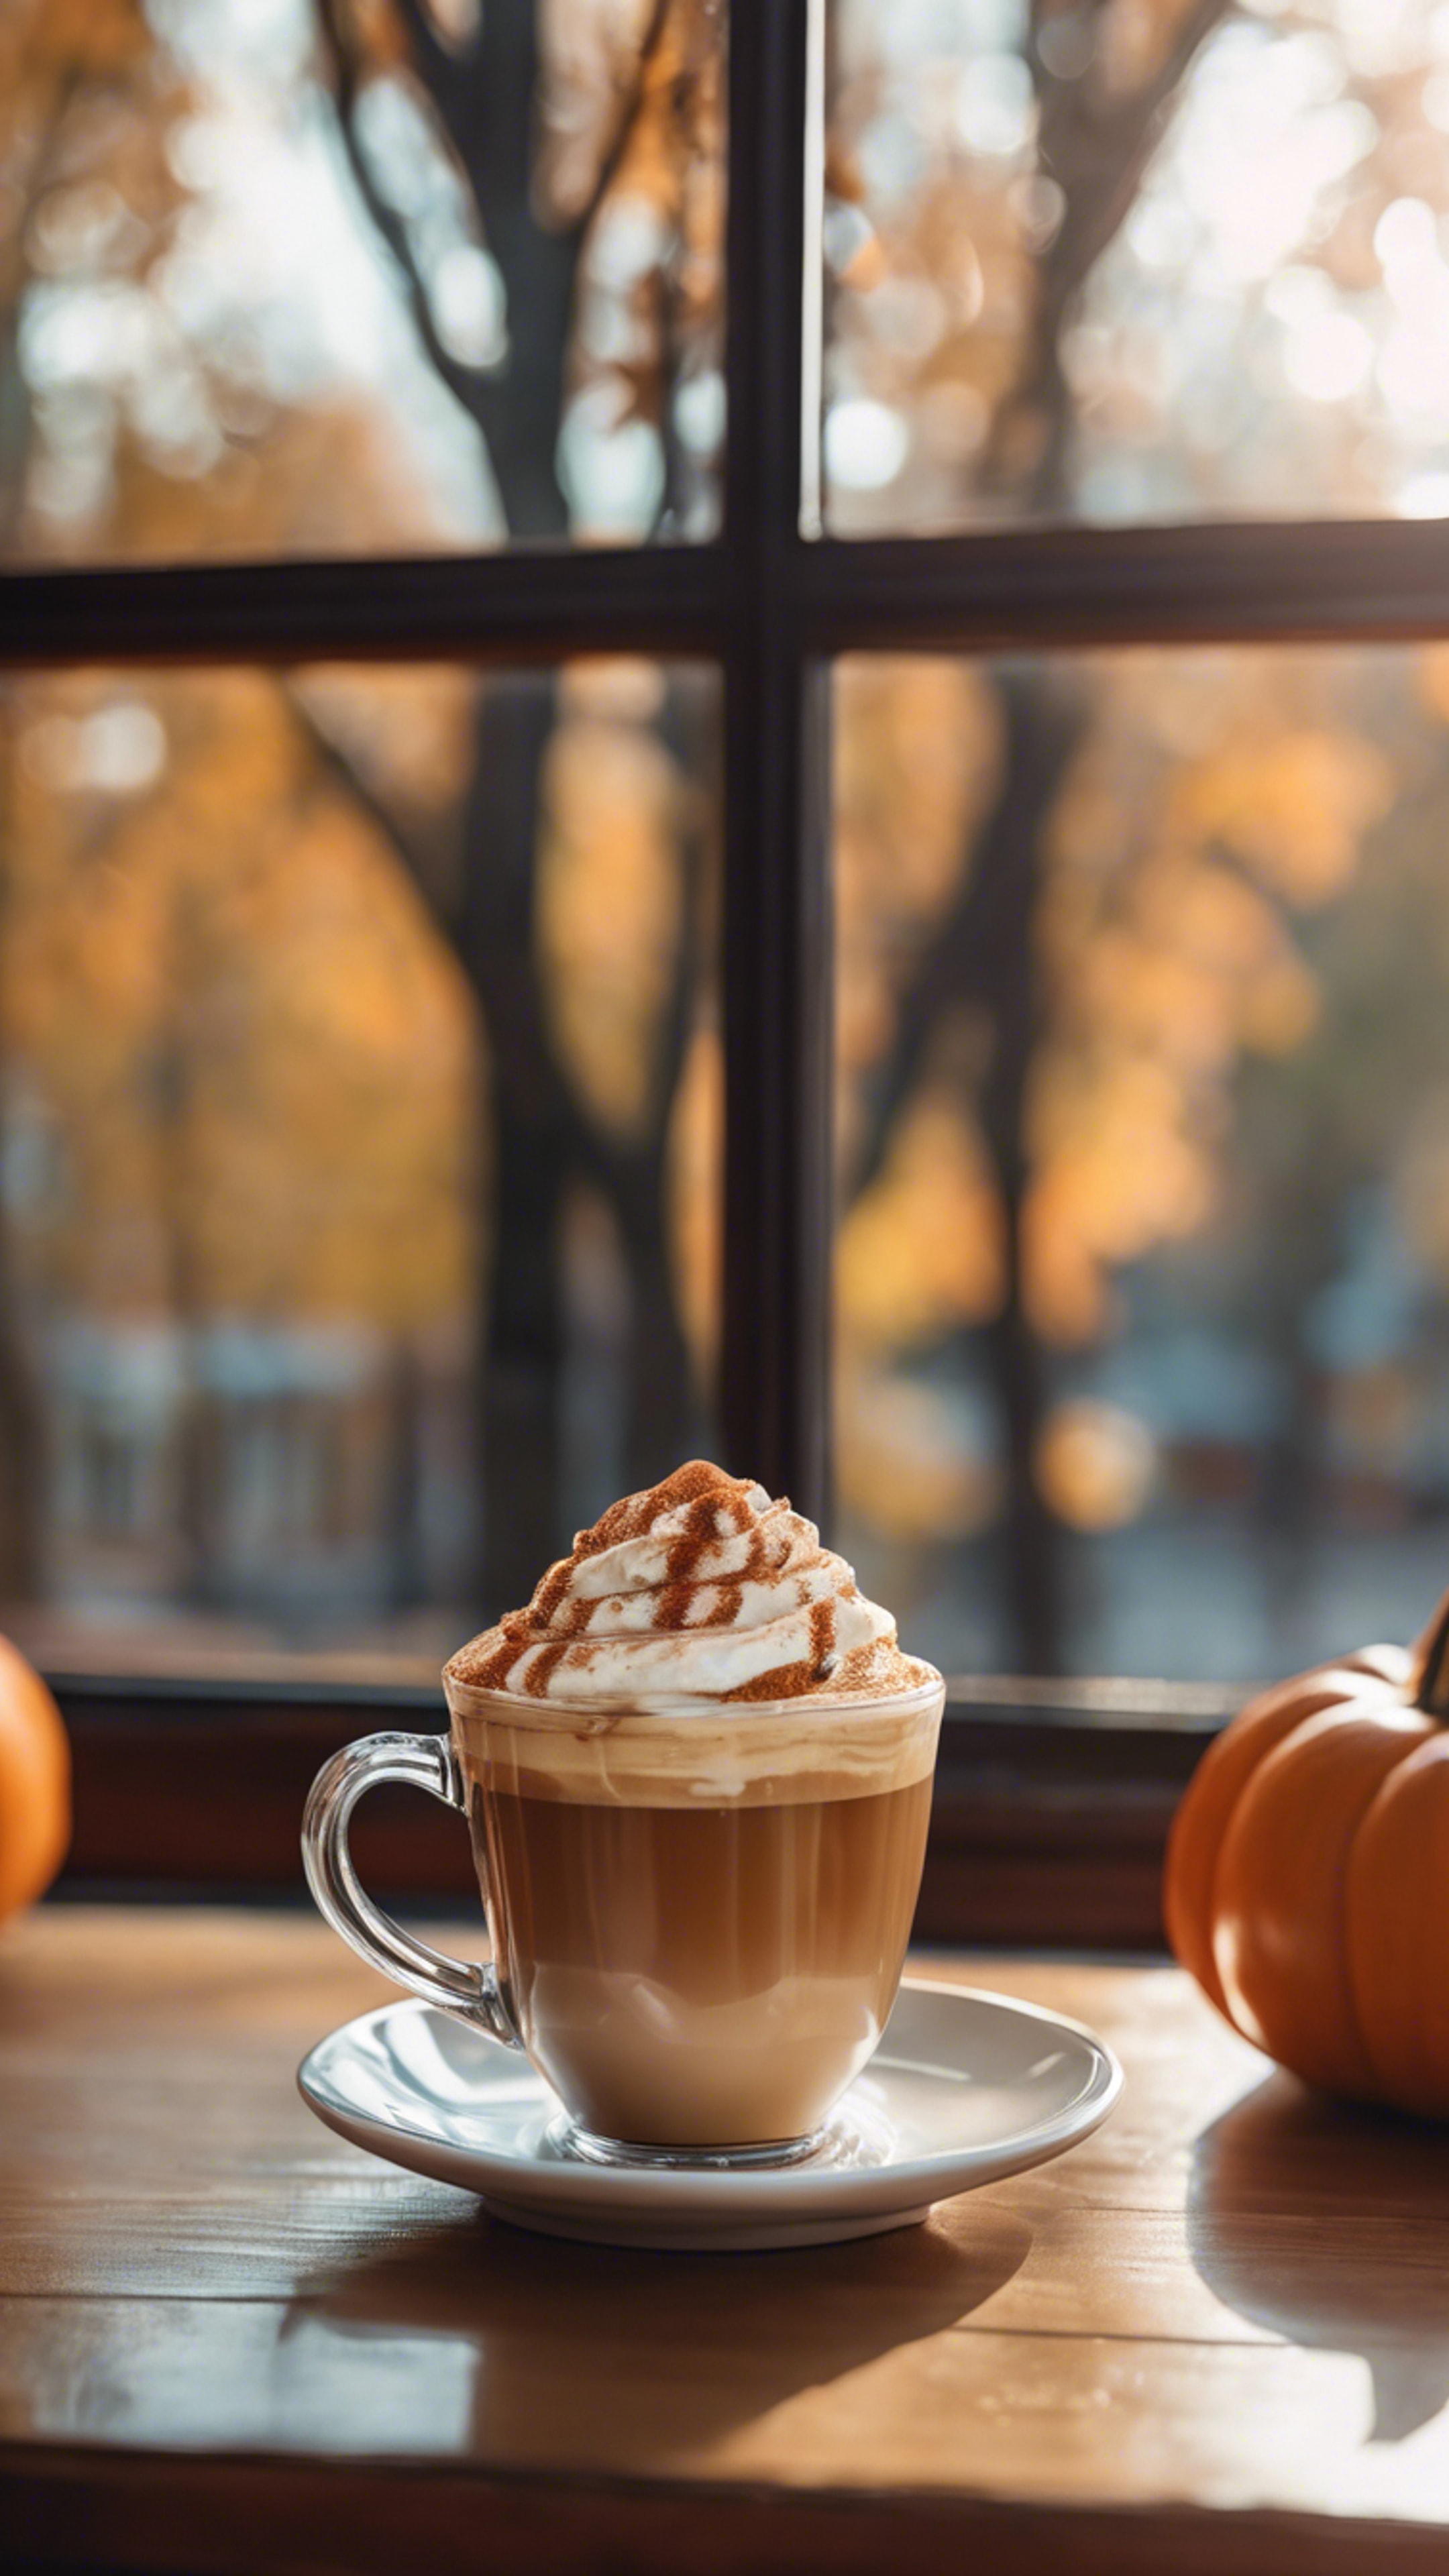 A cinnamon scented, aesthetically decorated pumpkin spice latte on a café table beside a window showing fall trees.壁紙[744c595cd79c47deb68d]